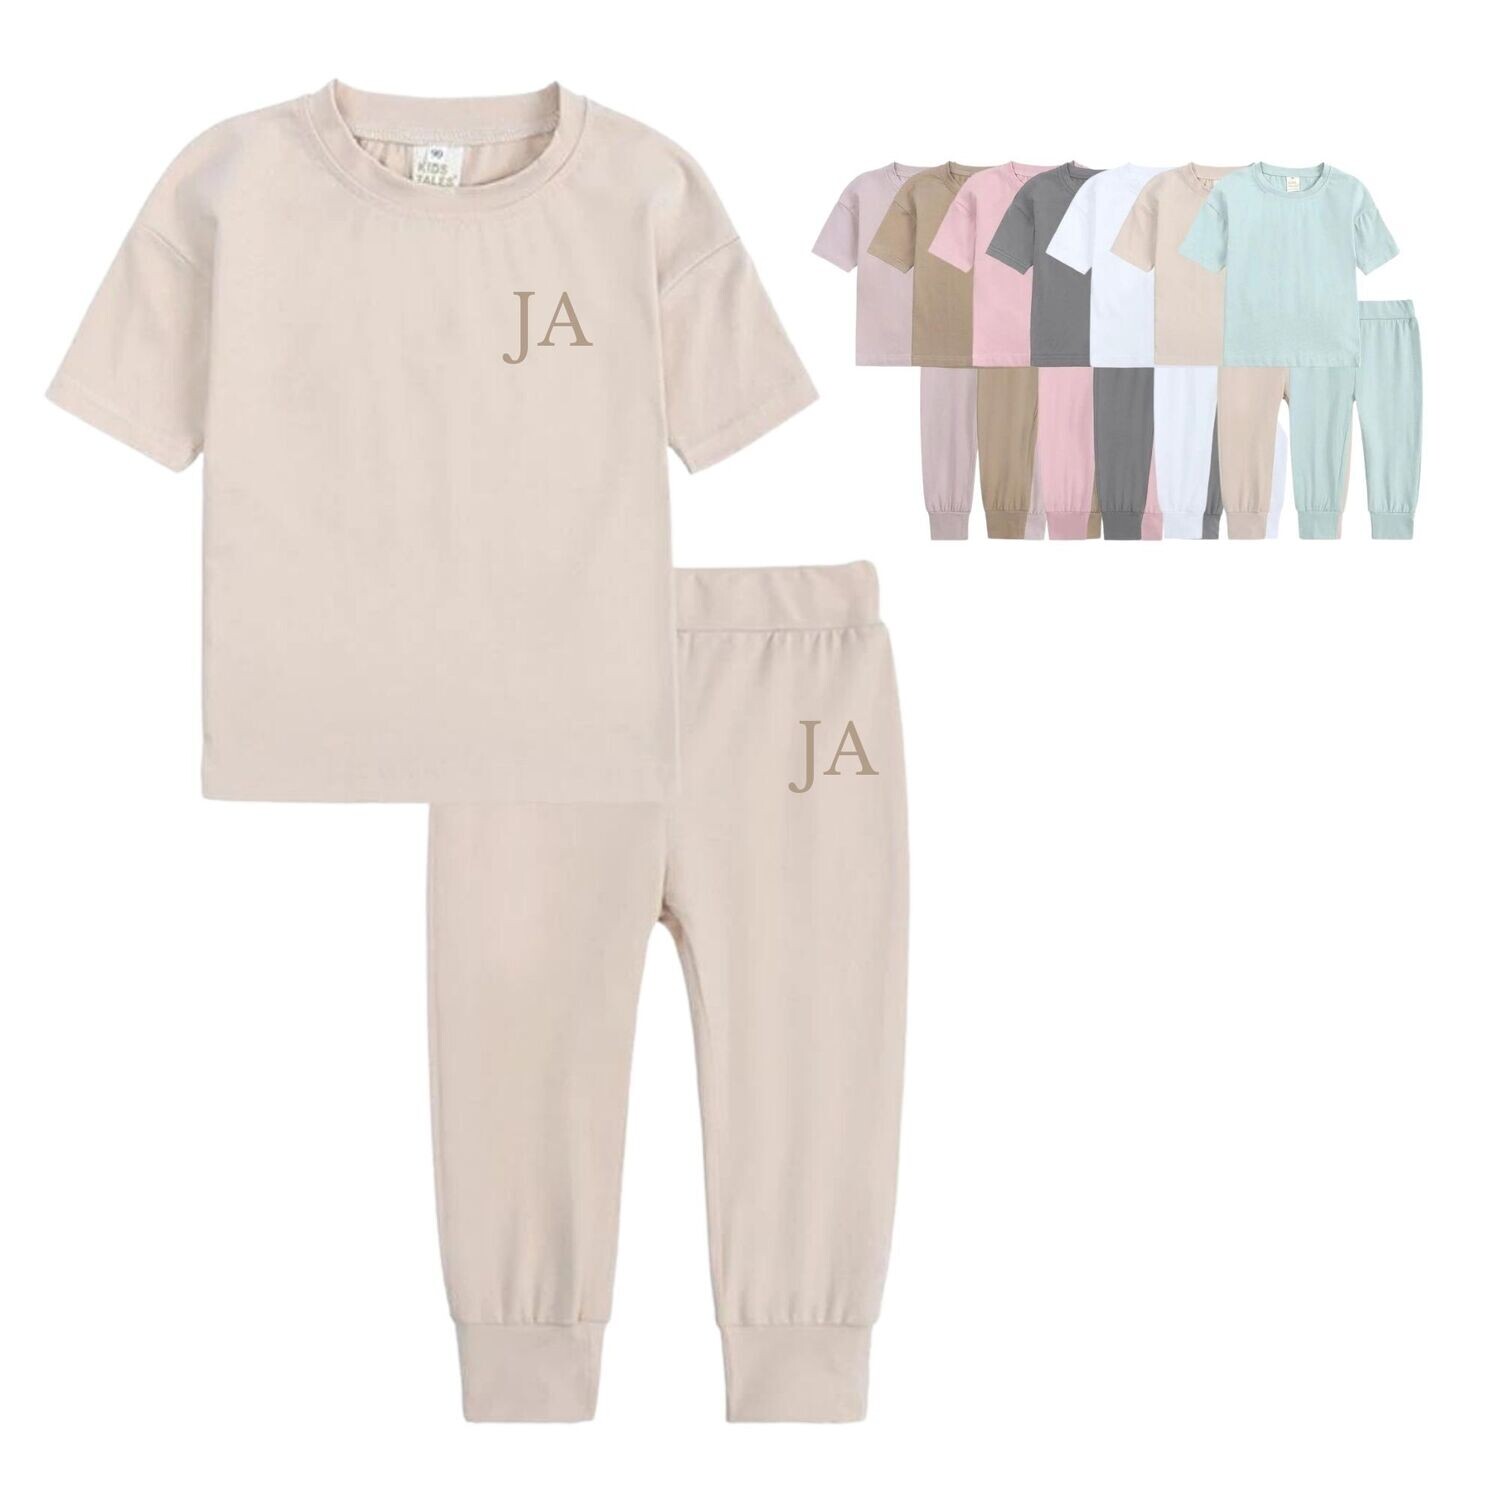 Personalised Children's Loungewear with Initials